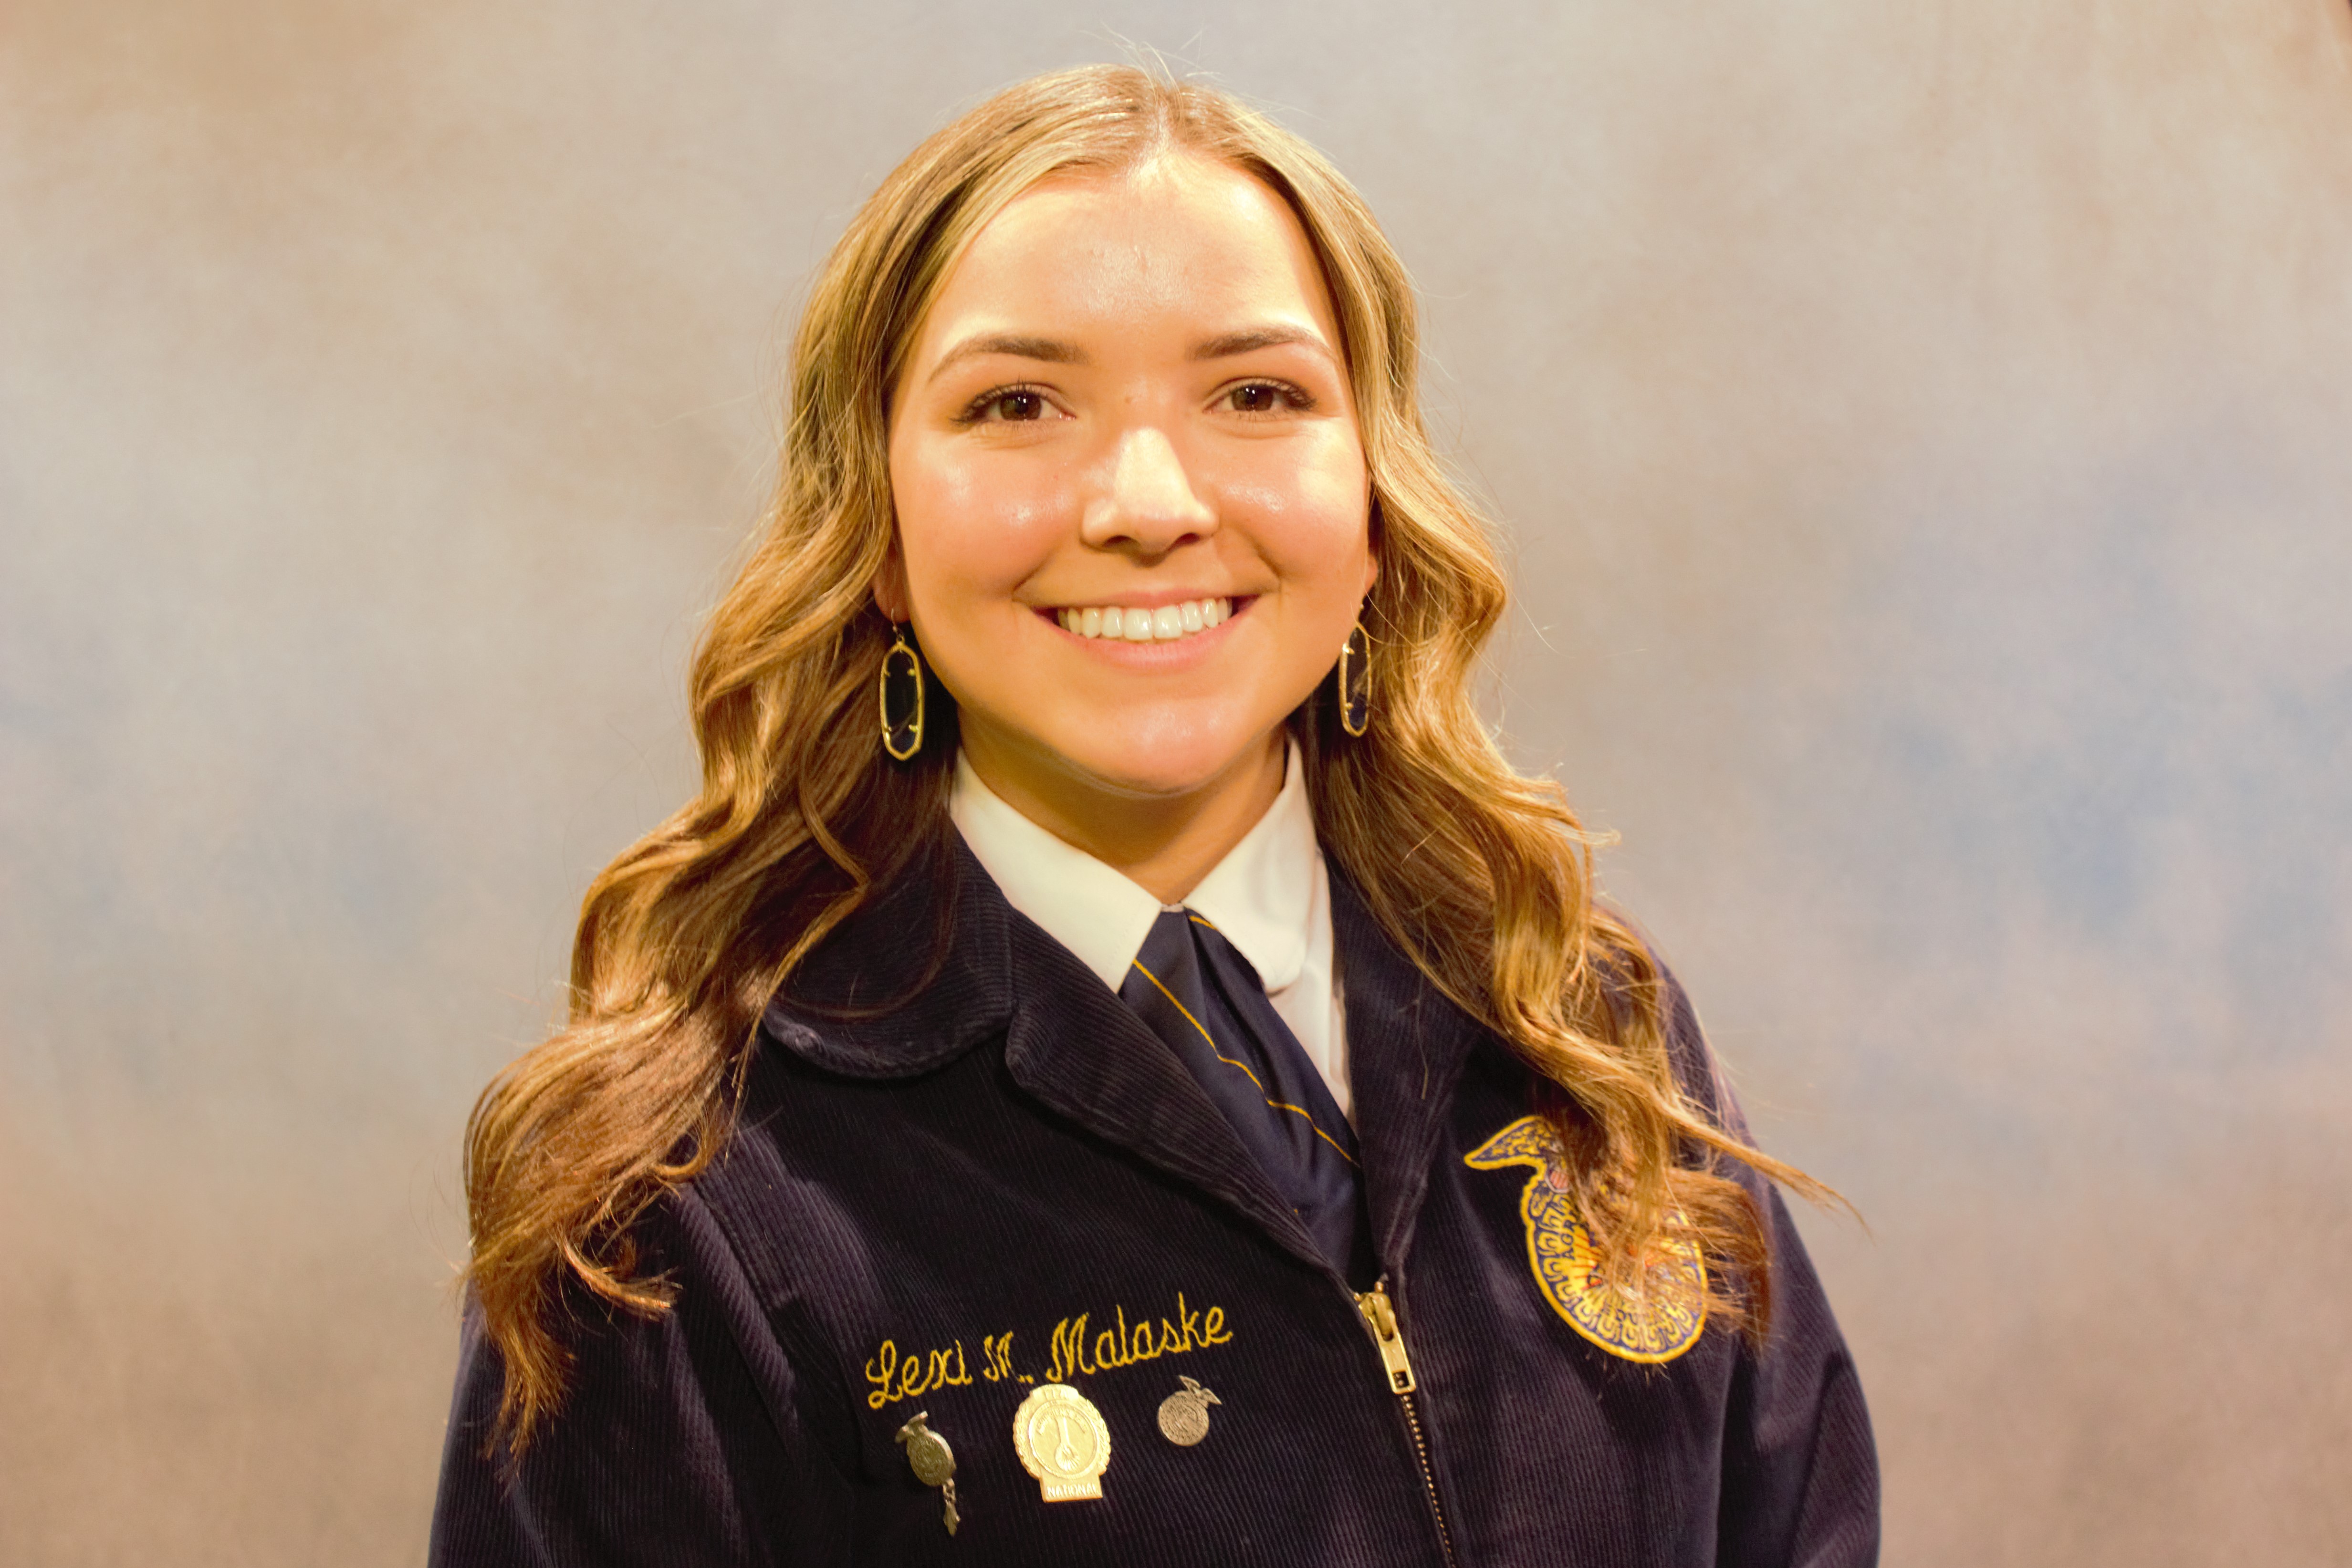 Introducing Lexie Malaske of the Harrah FFA Chapter, Your 2021 Central Area Star in Agribusiness